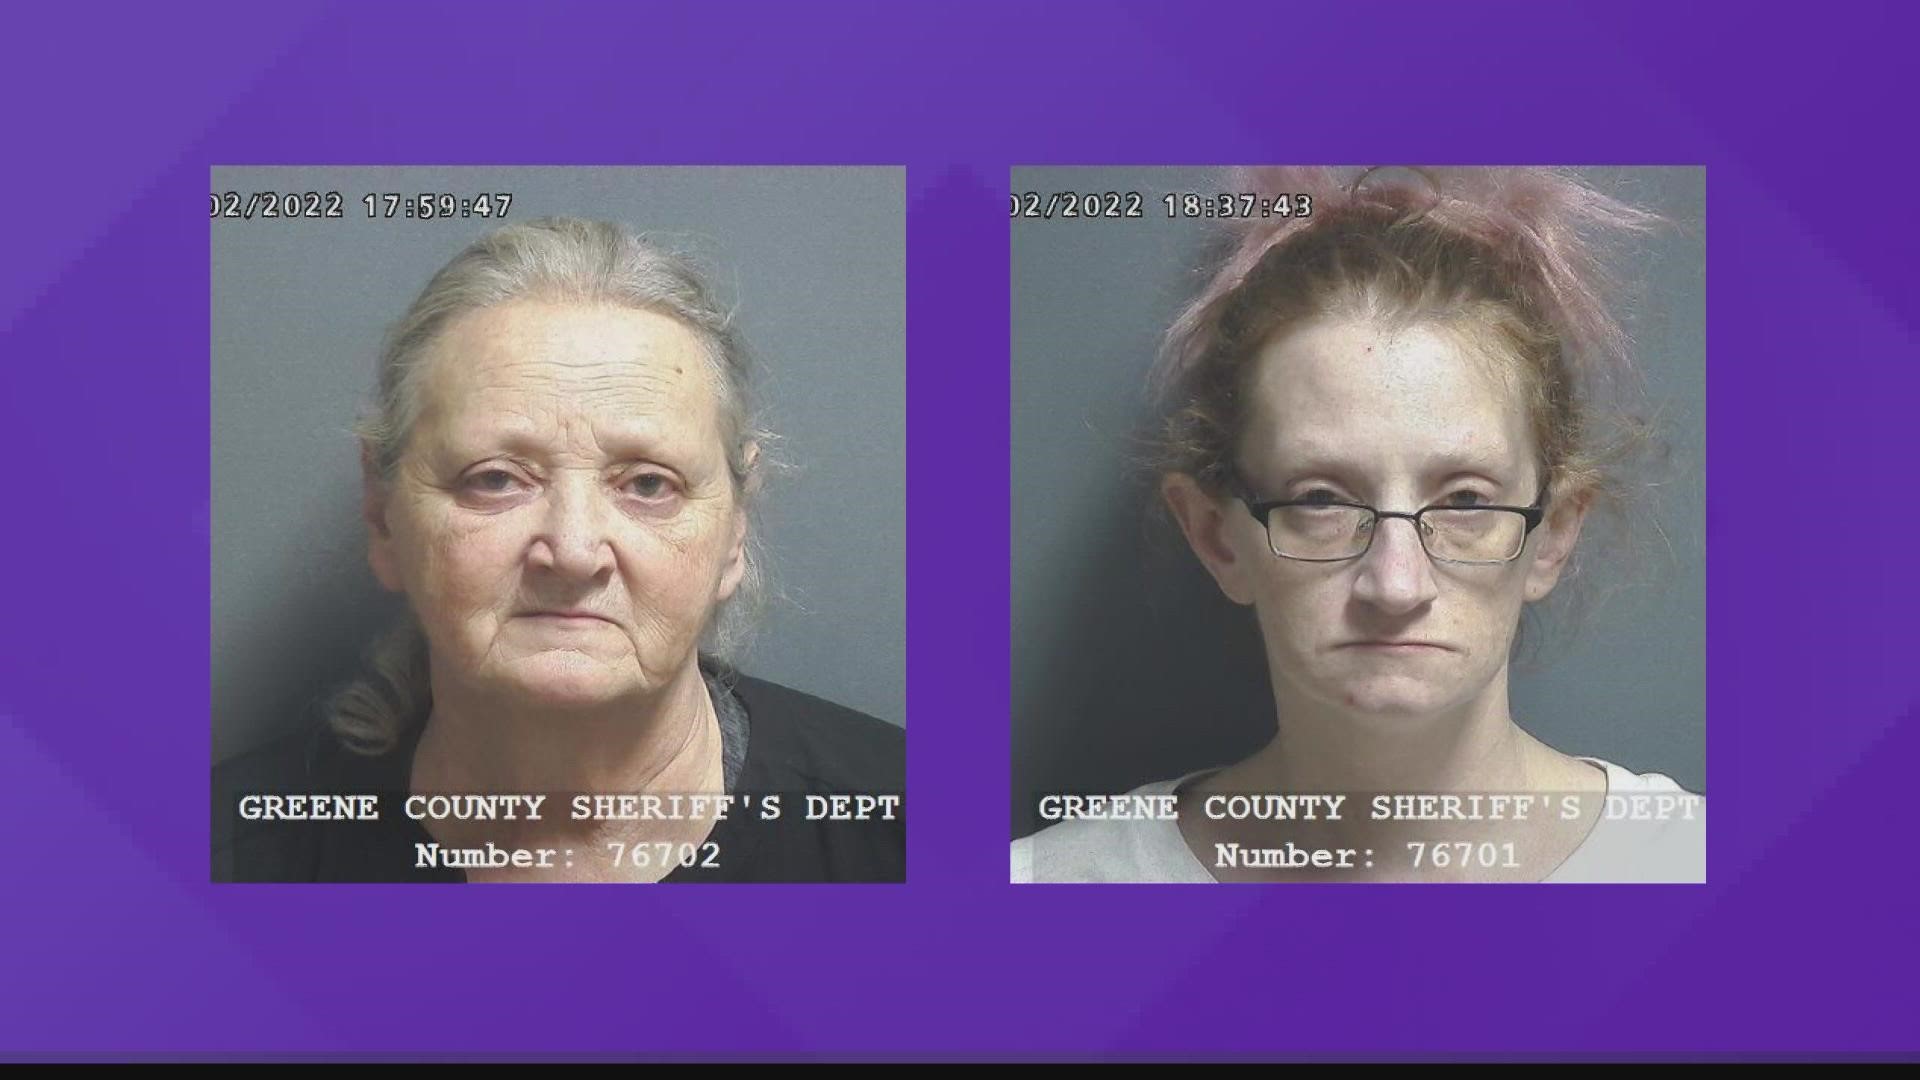 Kelly Porter, 36, and Phyllis Porter, 63, were arrested for outstanding warrants from multiple counties. Charges related to the cemetery thefts are pending.